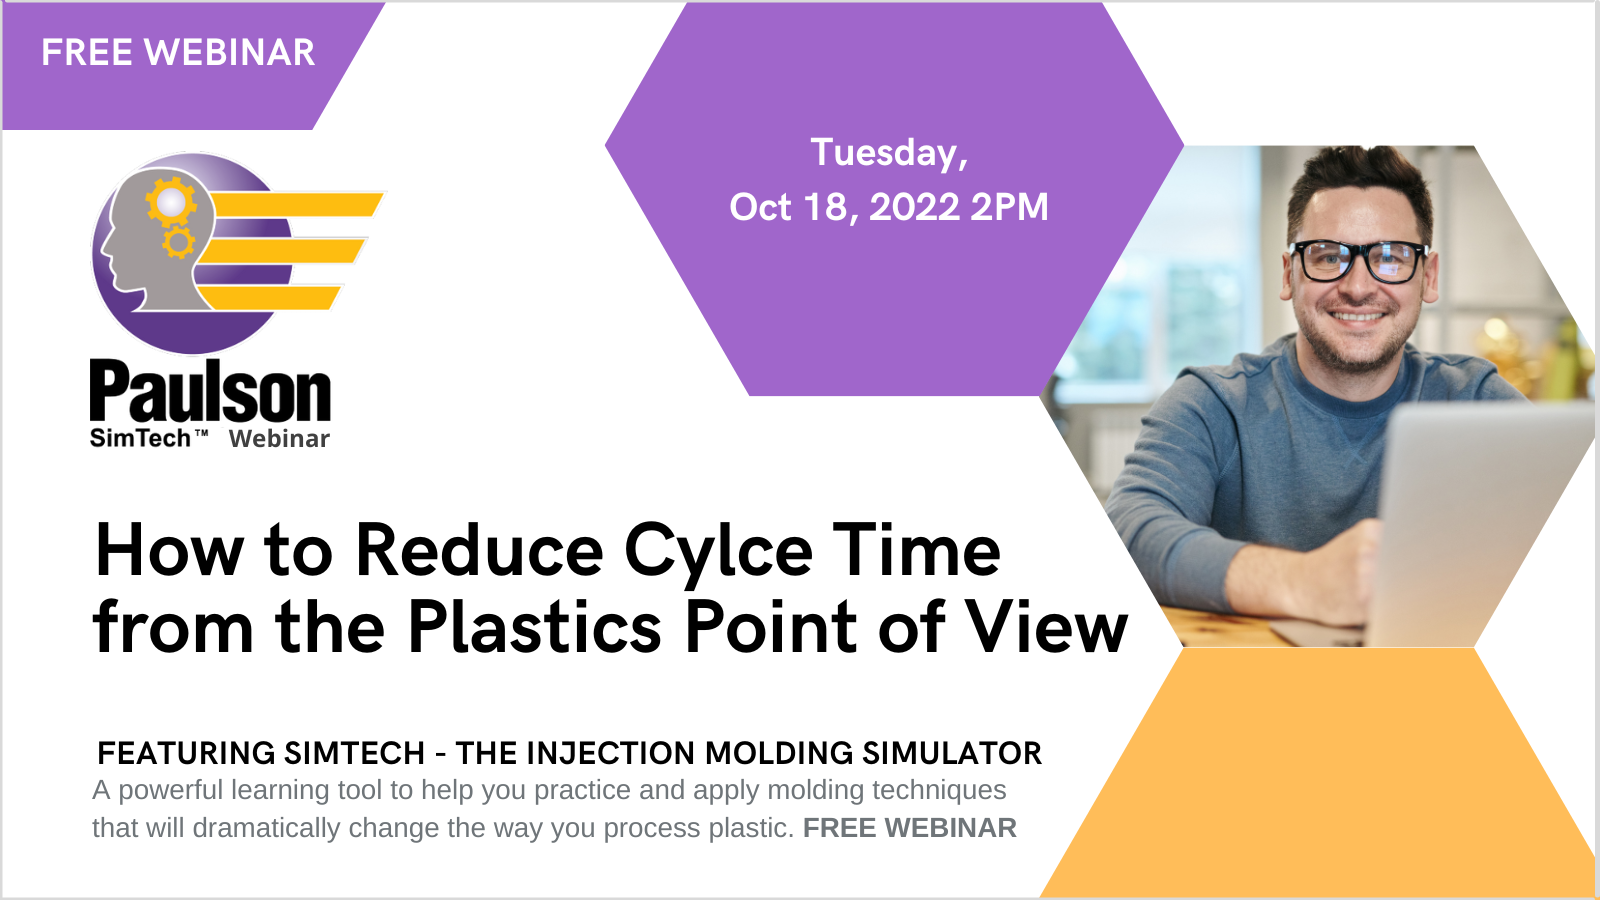 Webinar: How to Reduce Cycle Time from the Plastics Point of View